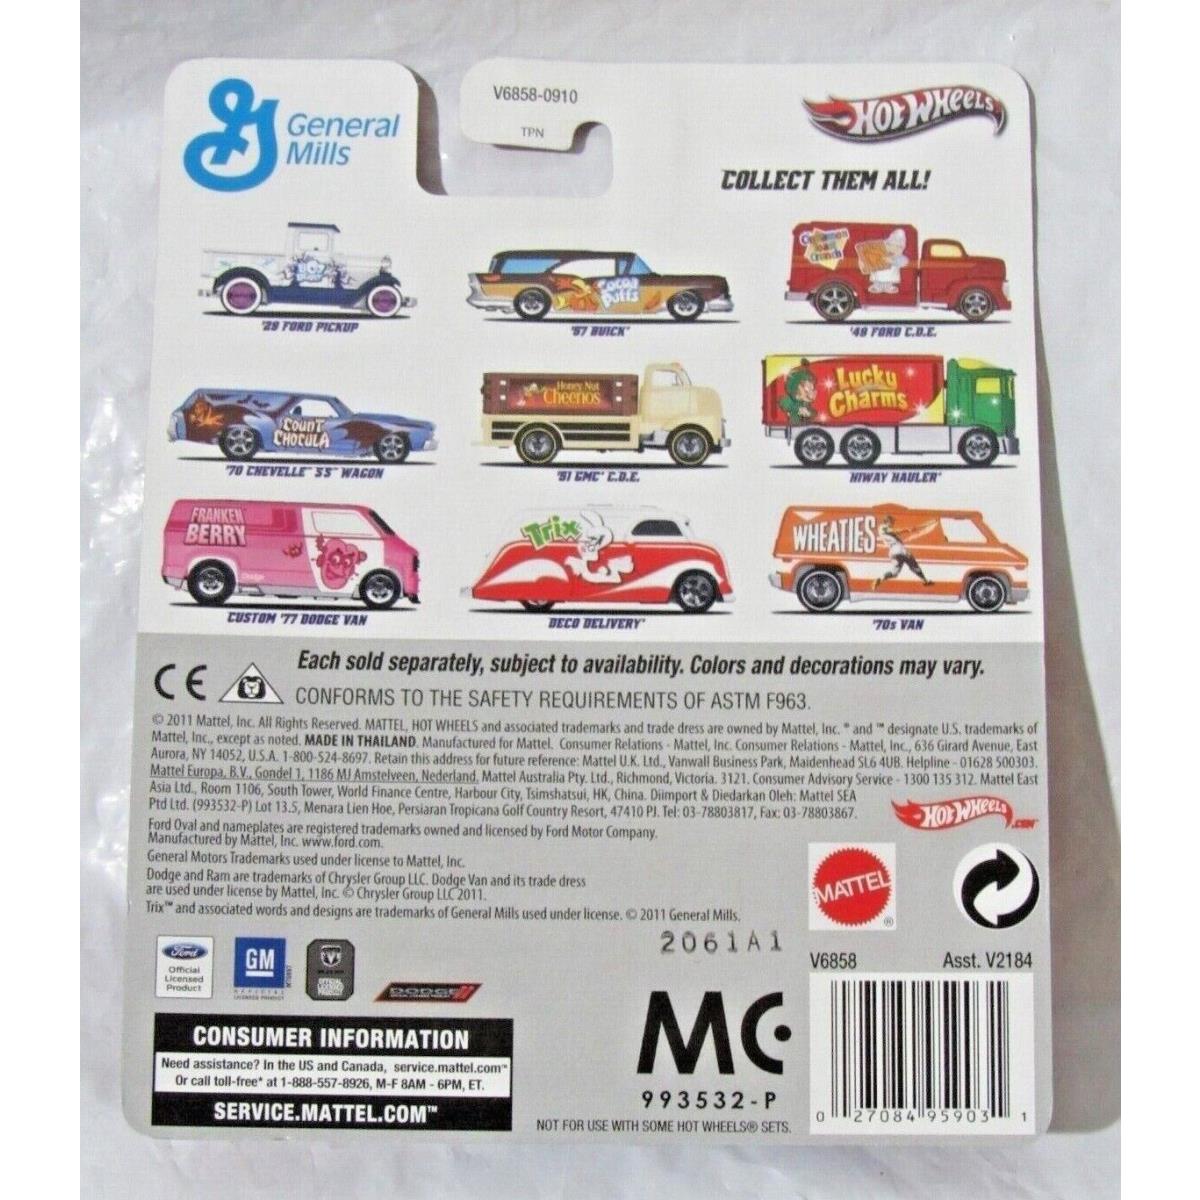 2011 Hot Wheels General Mills Deco Delivery - Trix Make An Offer